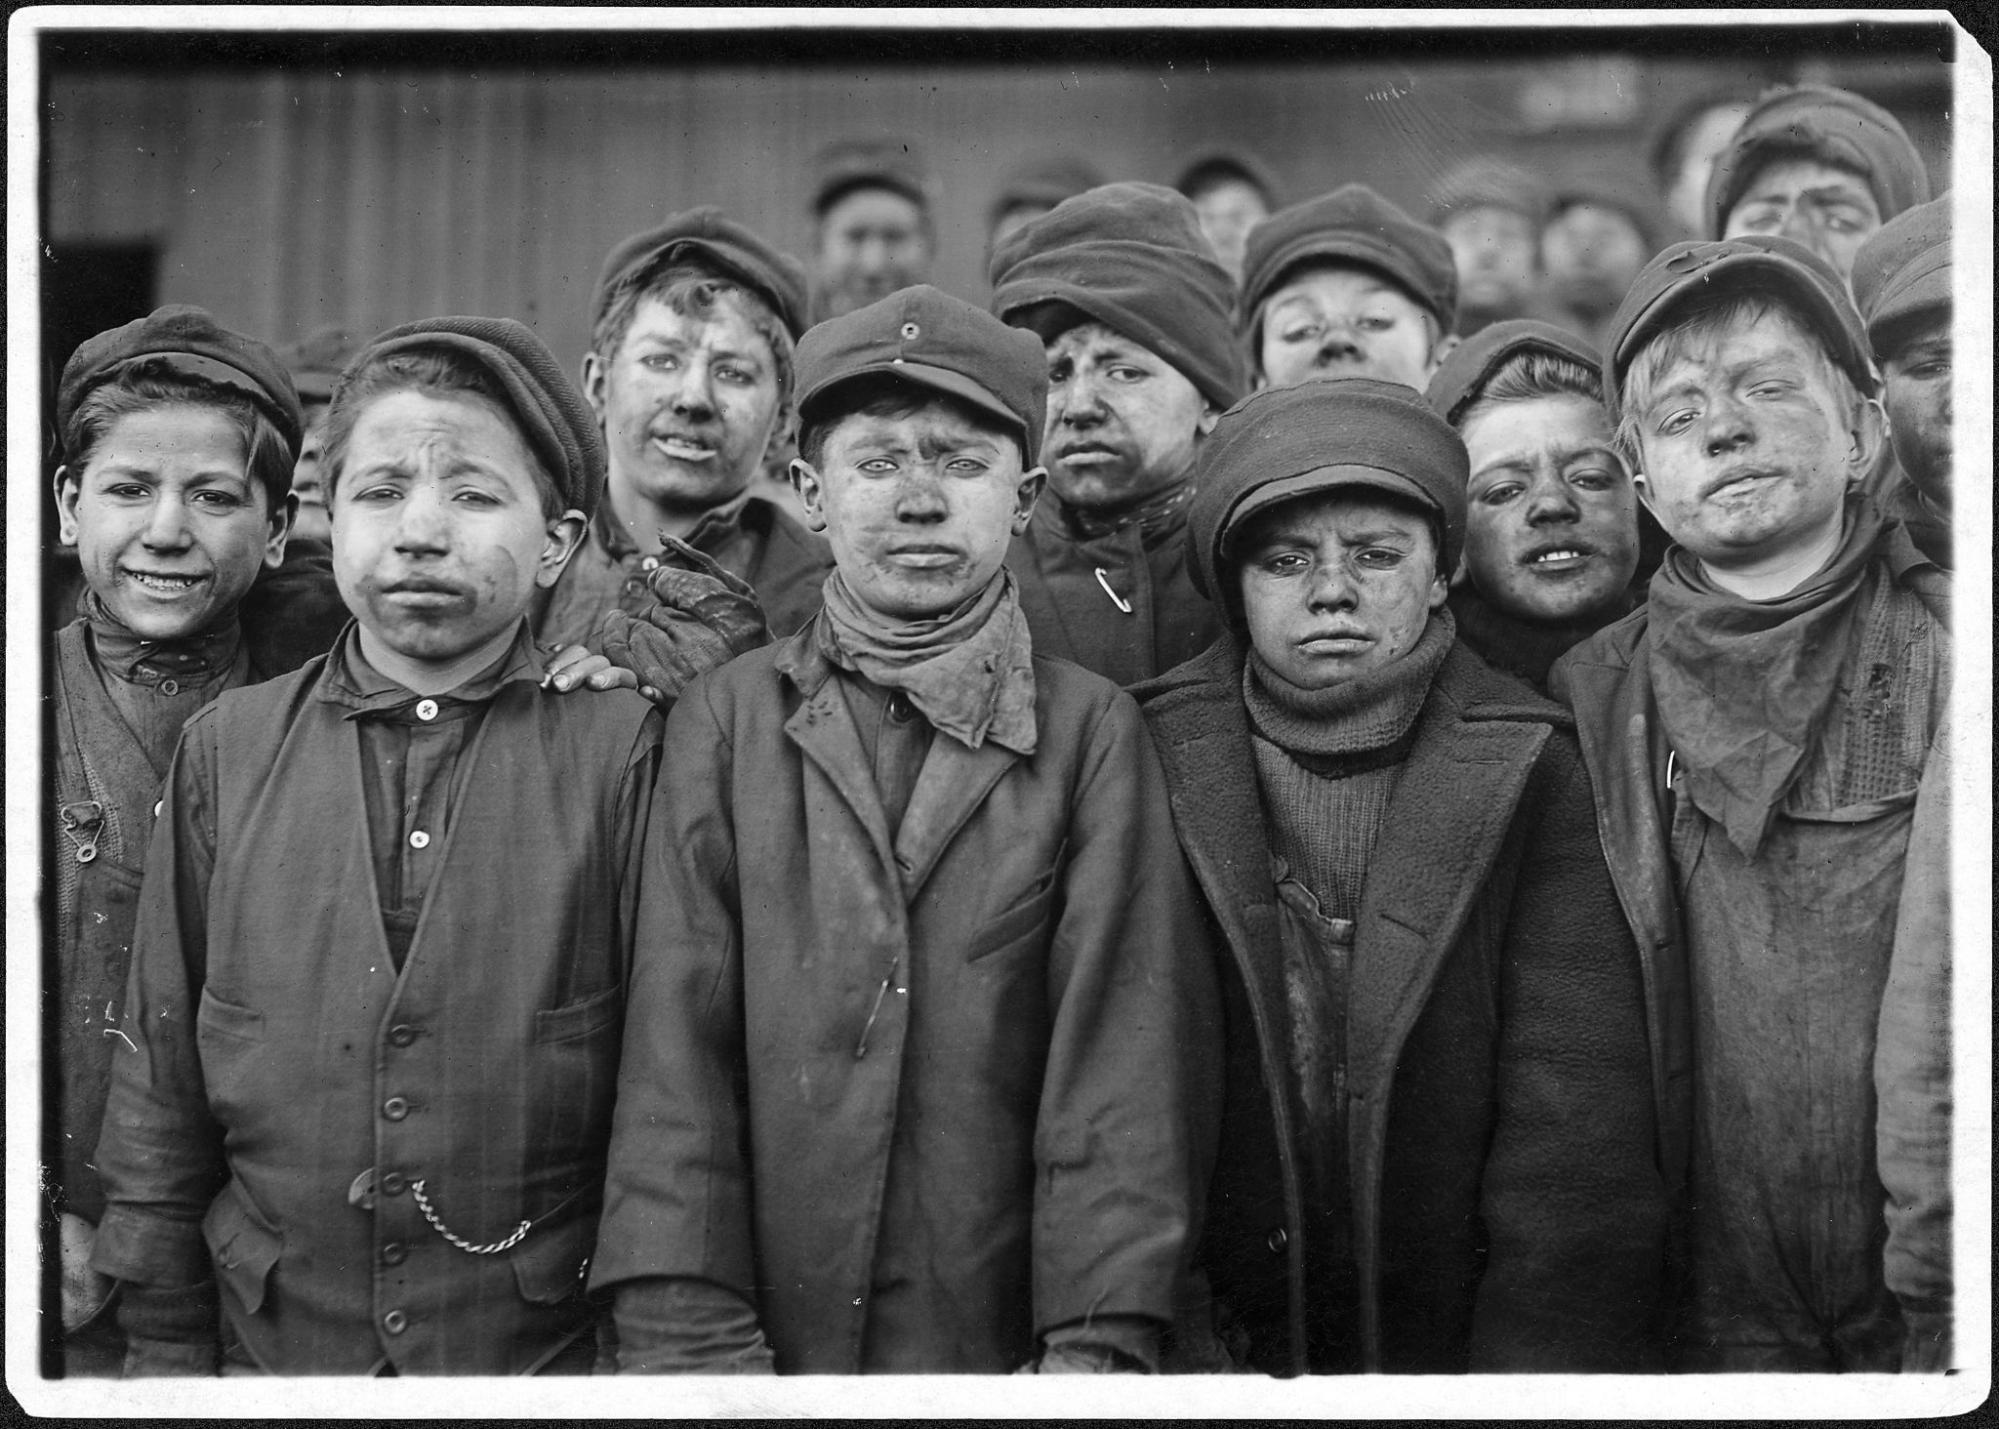 A photo of young boys, who appear to be about 8 to 12 years old, dressed in work clothing with soot on their faces.